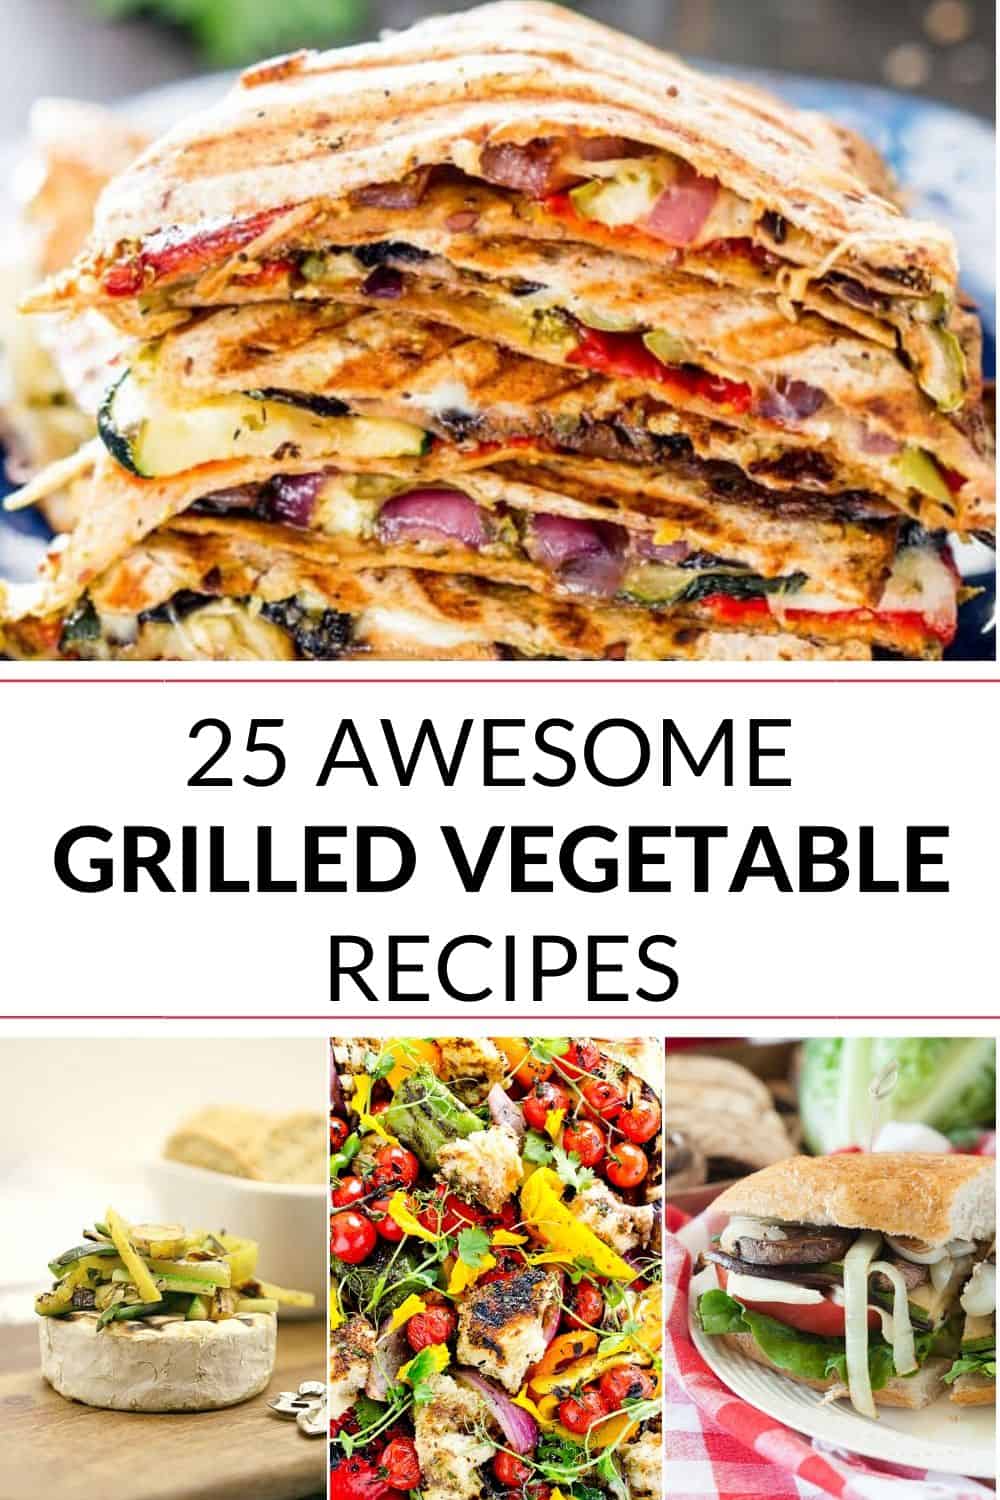 Check out these amazing grilled vegetable recipes!